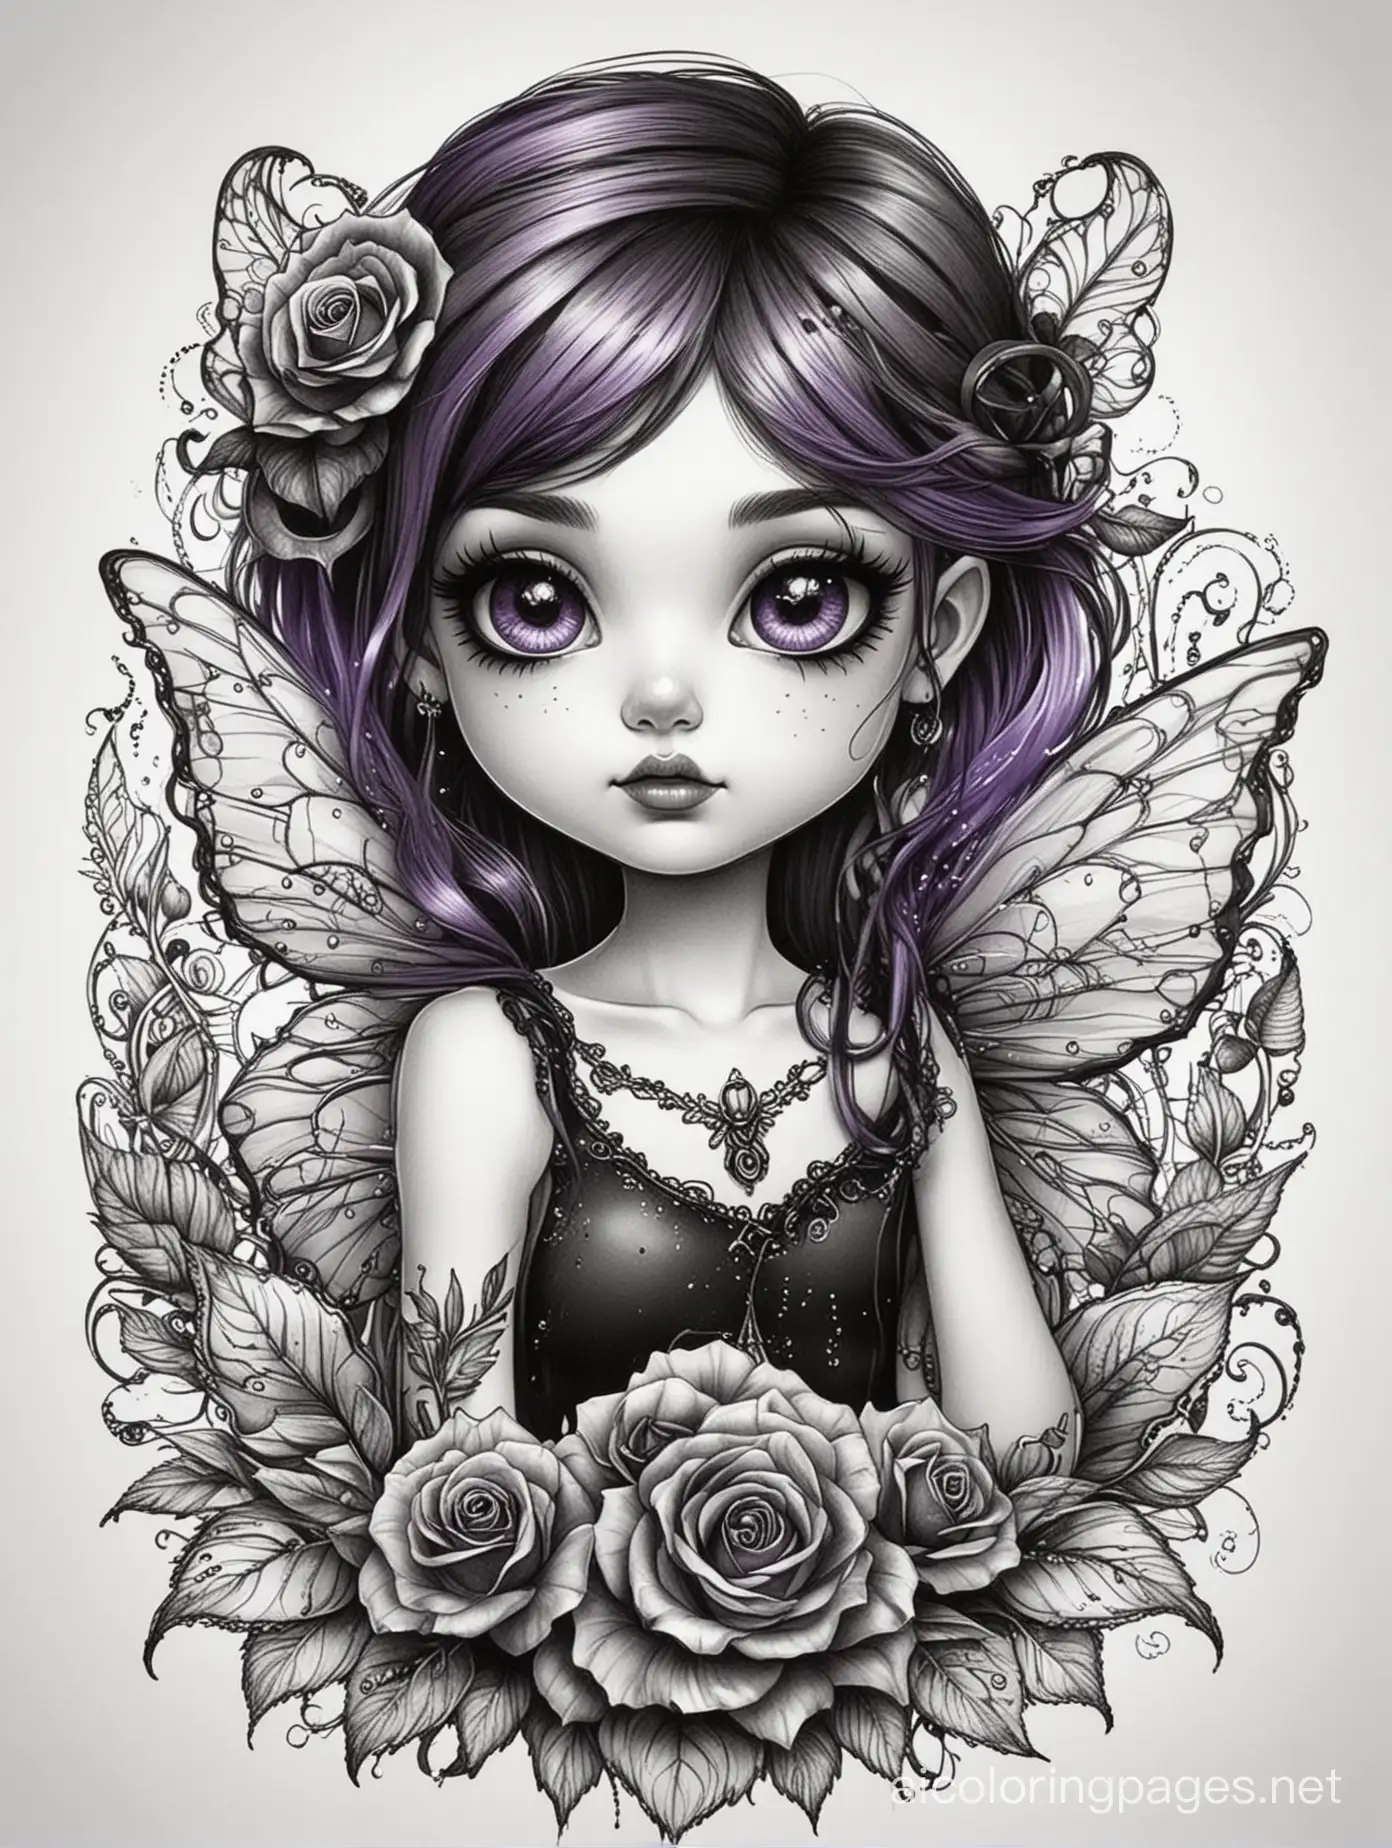 create a beautiful big round face big eyes gothic punk rock style fairy holding a black rose. use purple and black colors only., Coloring Page, black and white, line art, white background, Simplicity, Ample White Space. The background of the coloring page is plain white to make it easy for young children to color within the lines. The outlines of all the subjects are easy to distinguish, making it simple for kids to color without too much difficulty